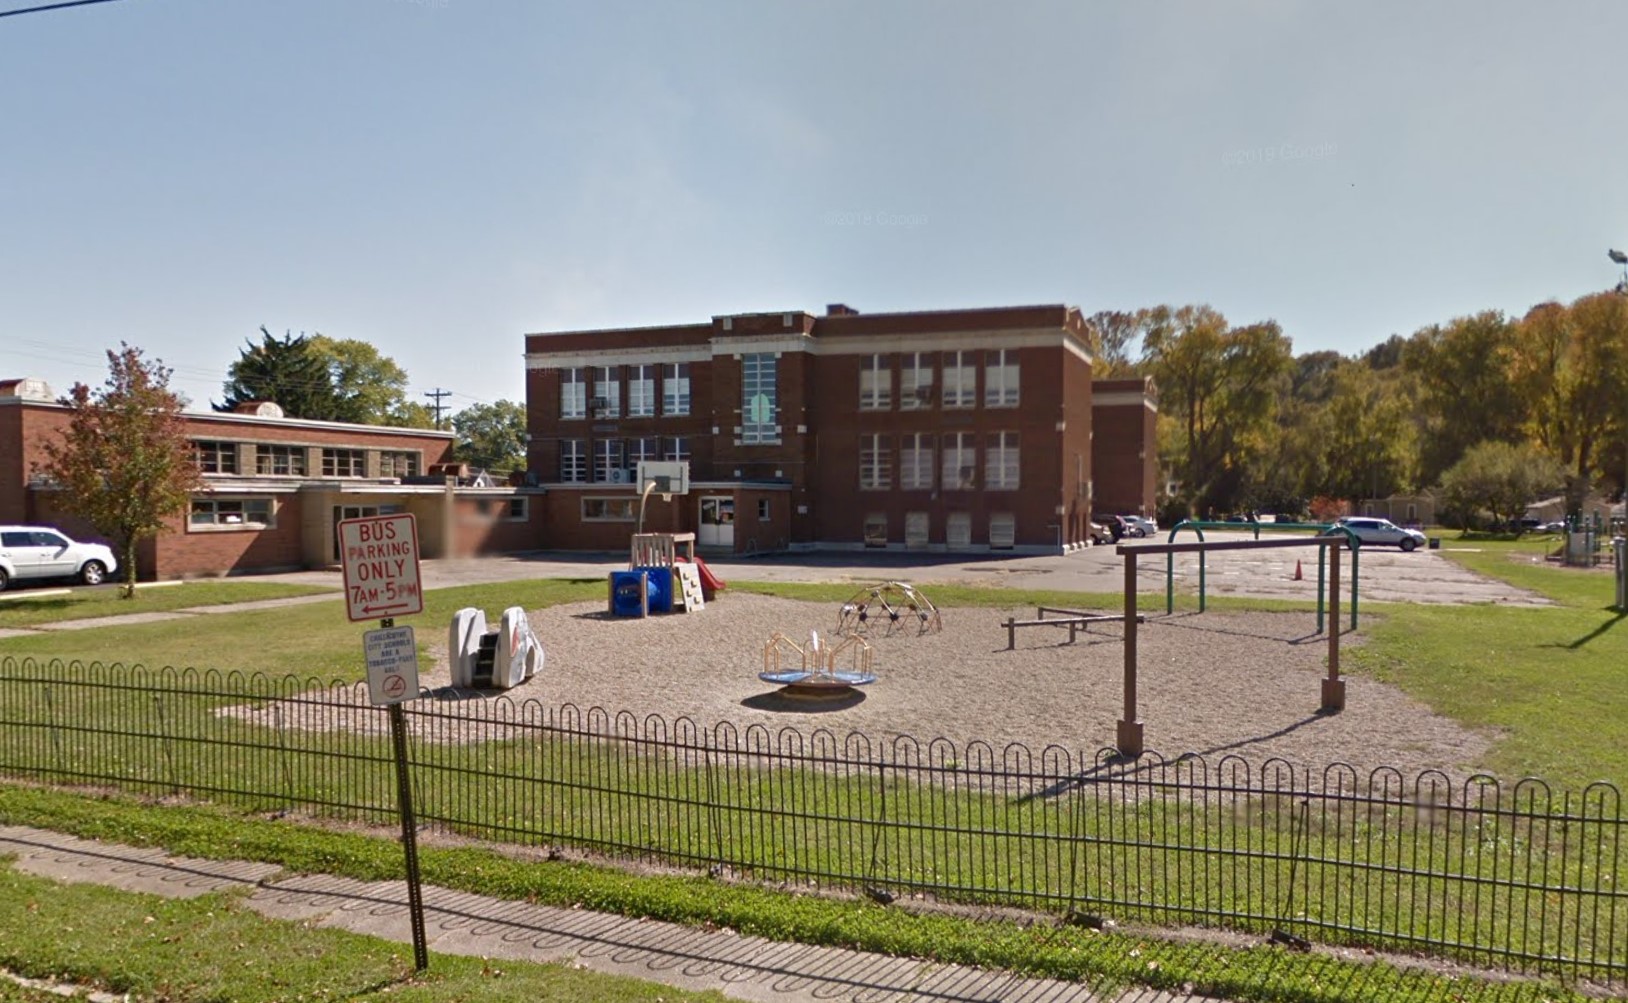 lighting-strikes-chillicothe-school-causes-fire-and-damage-scioto-post